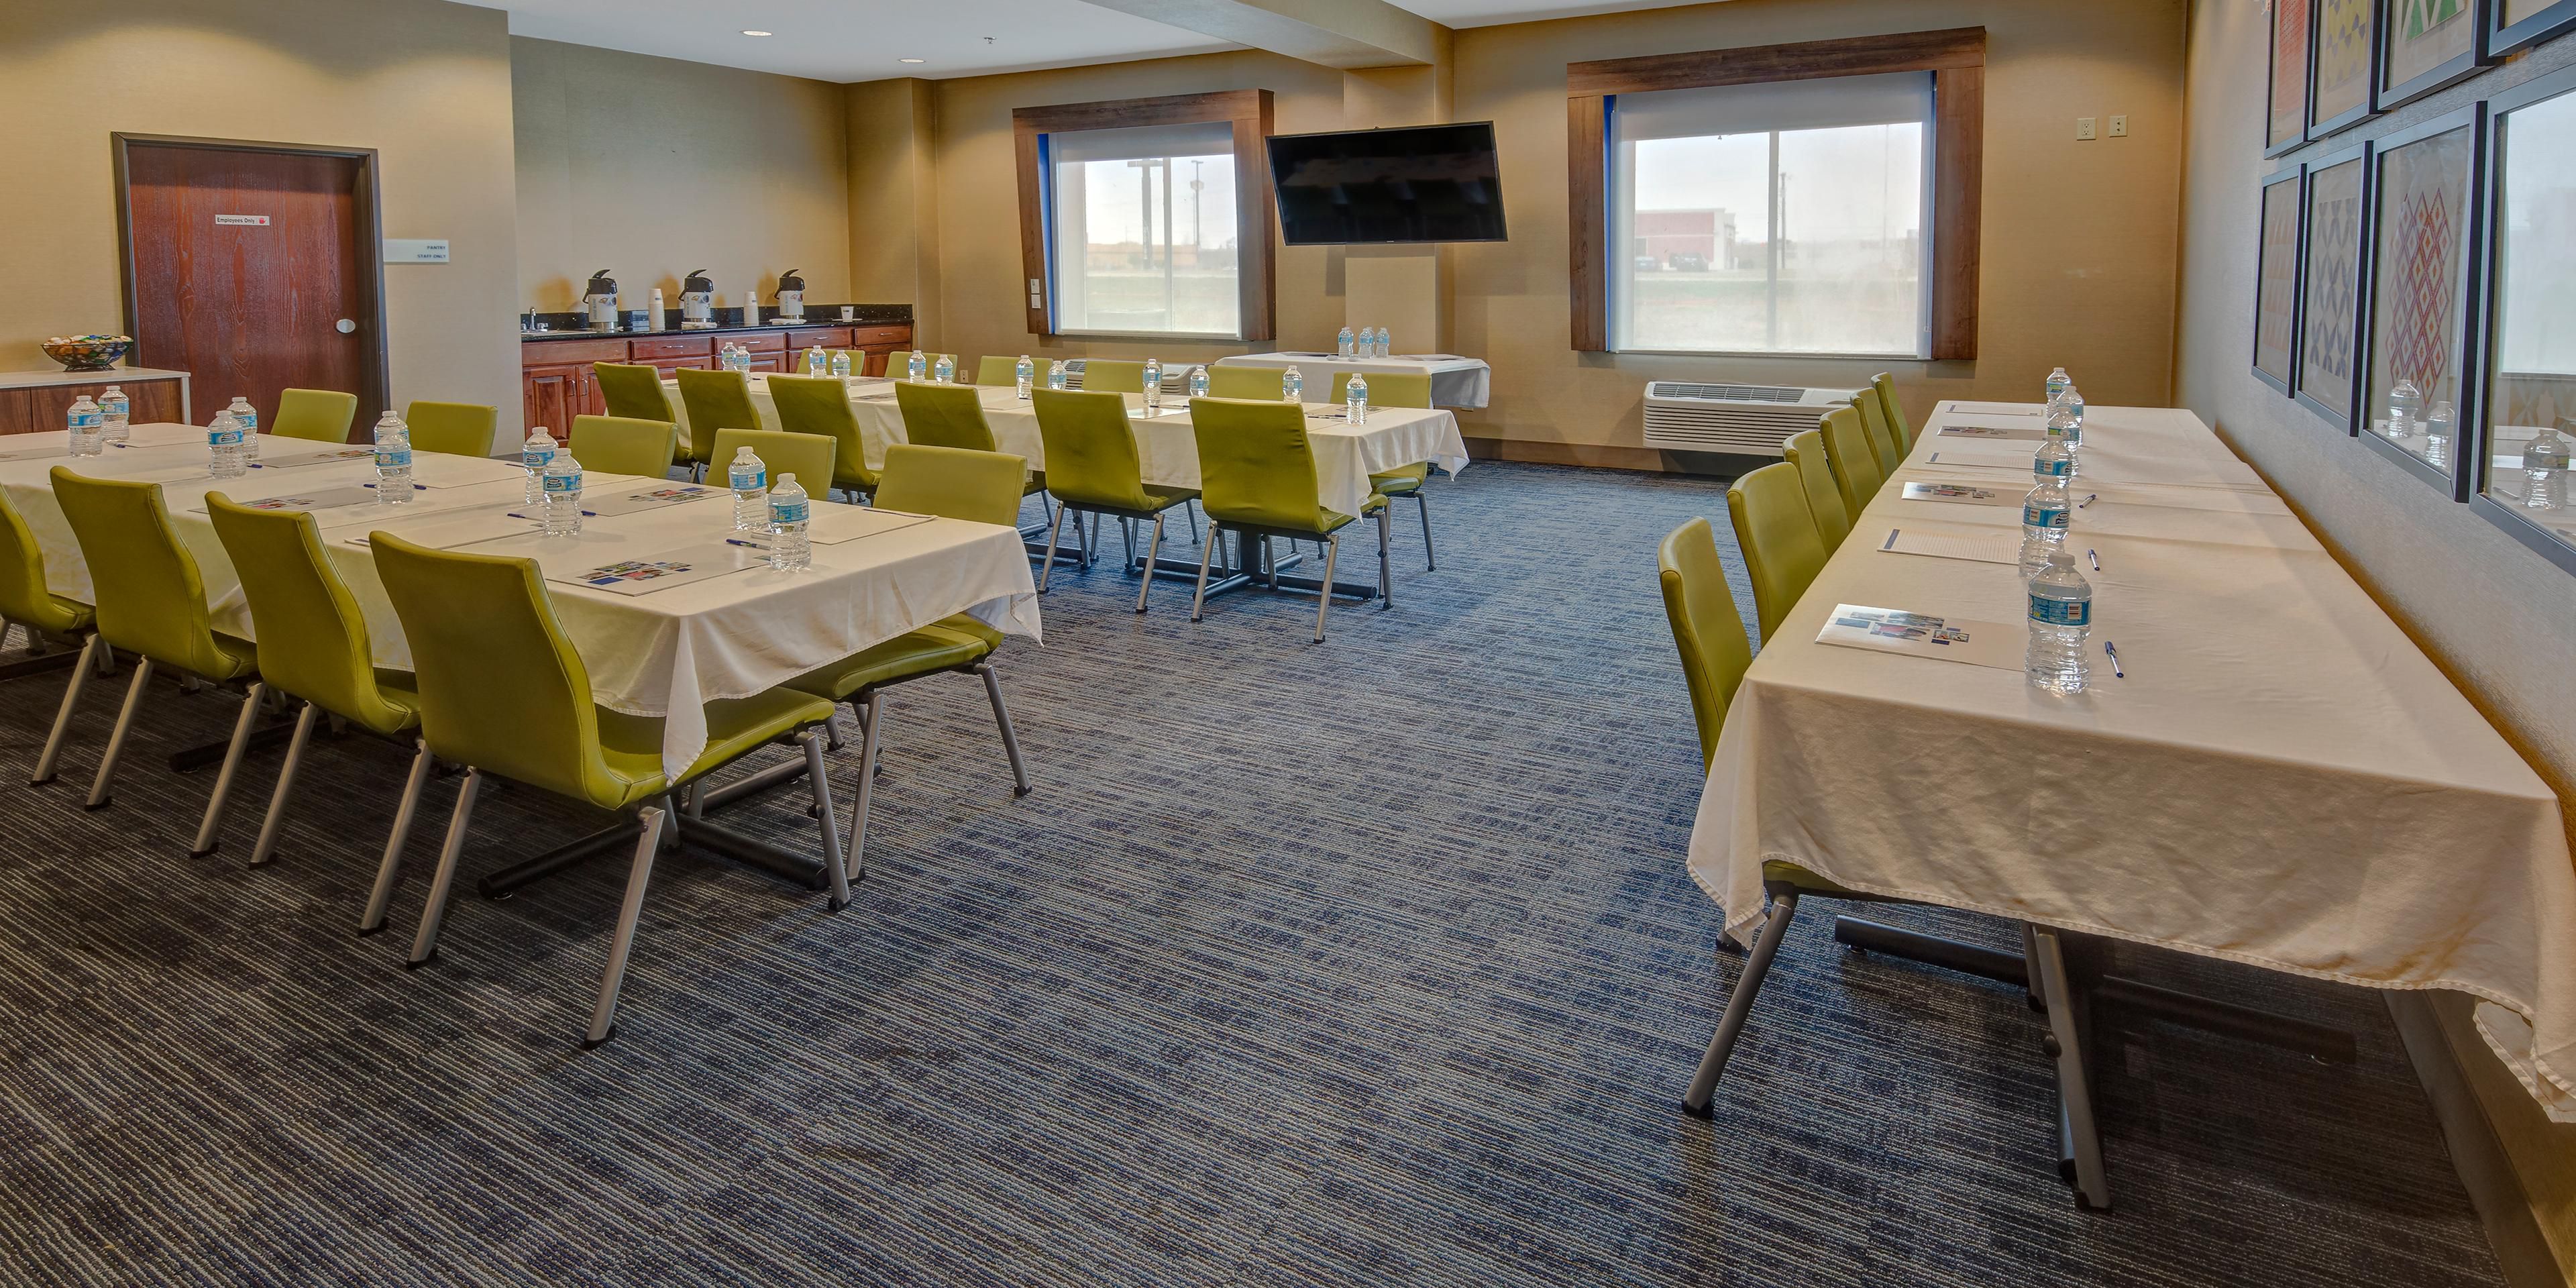 Host a formal business meeting or a unique special occasion in our versatile meeting space, which can accommodate up to 35 of your colleagues or closest friends and family members. Contact our Sales Office for your next event.